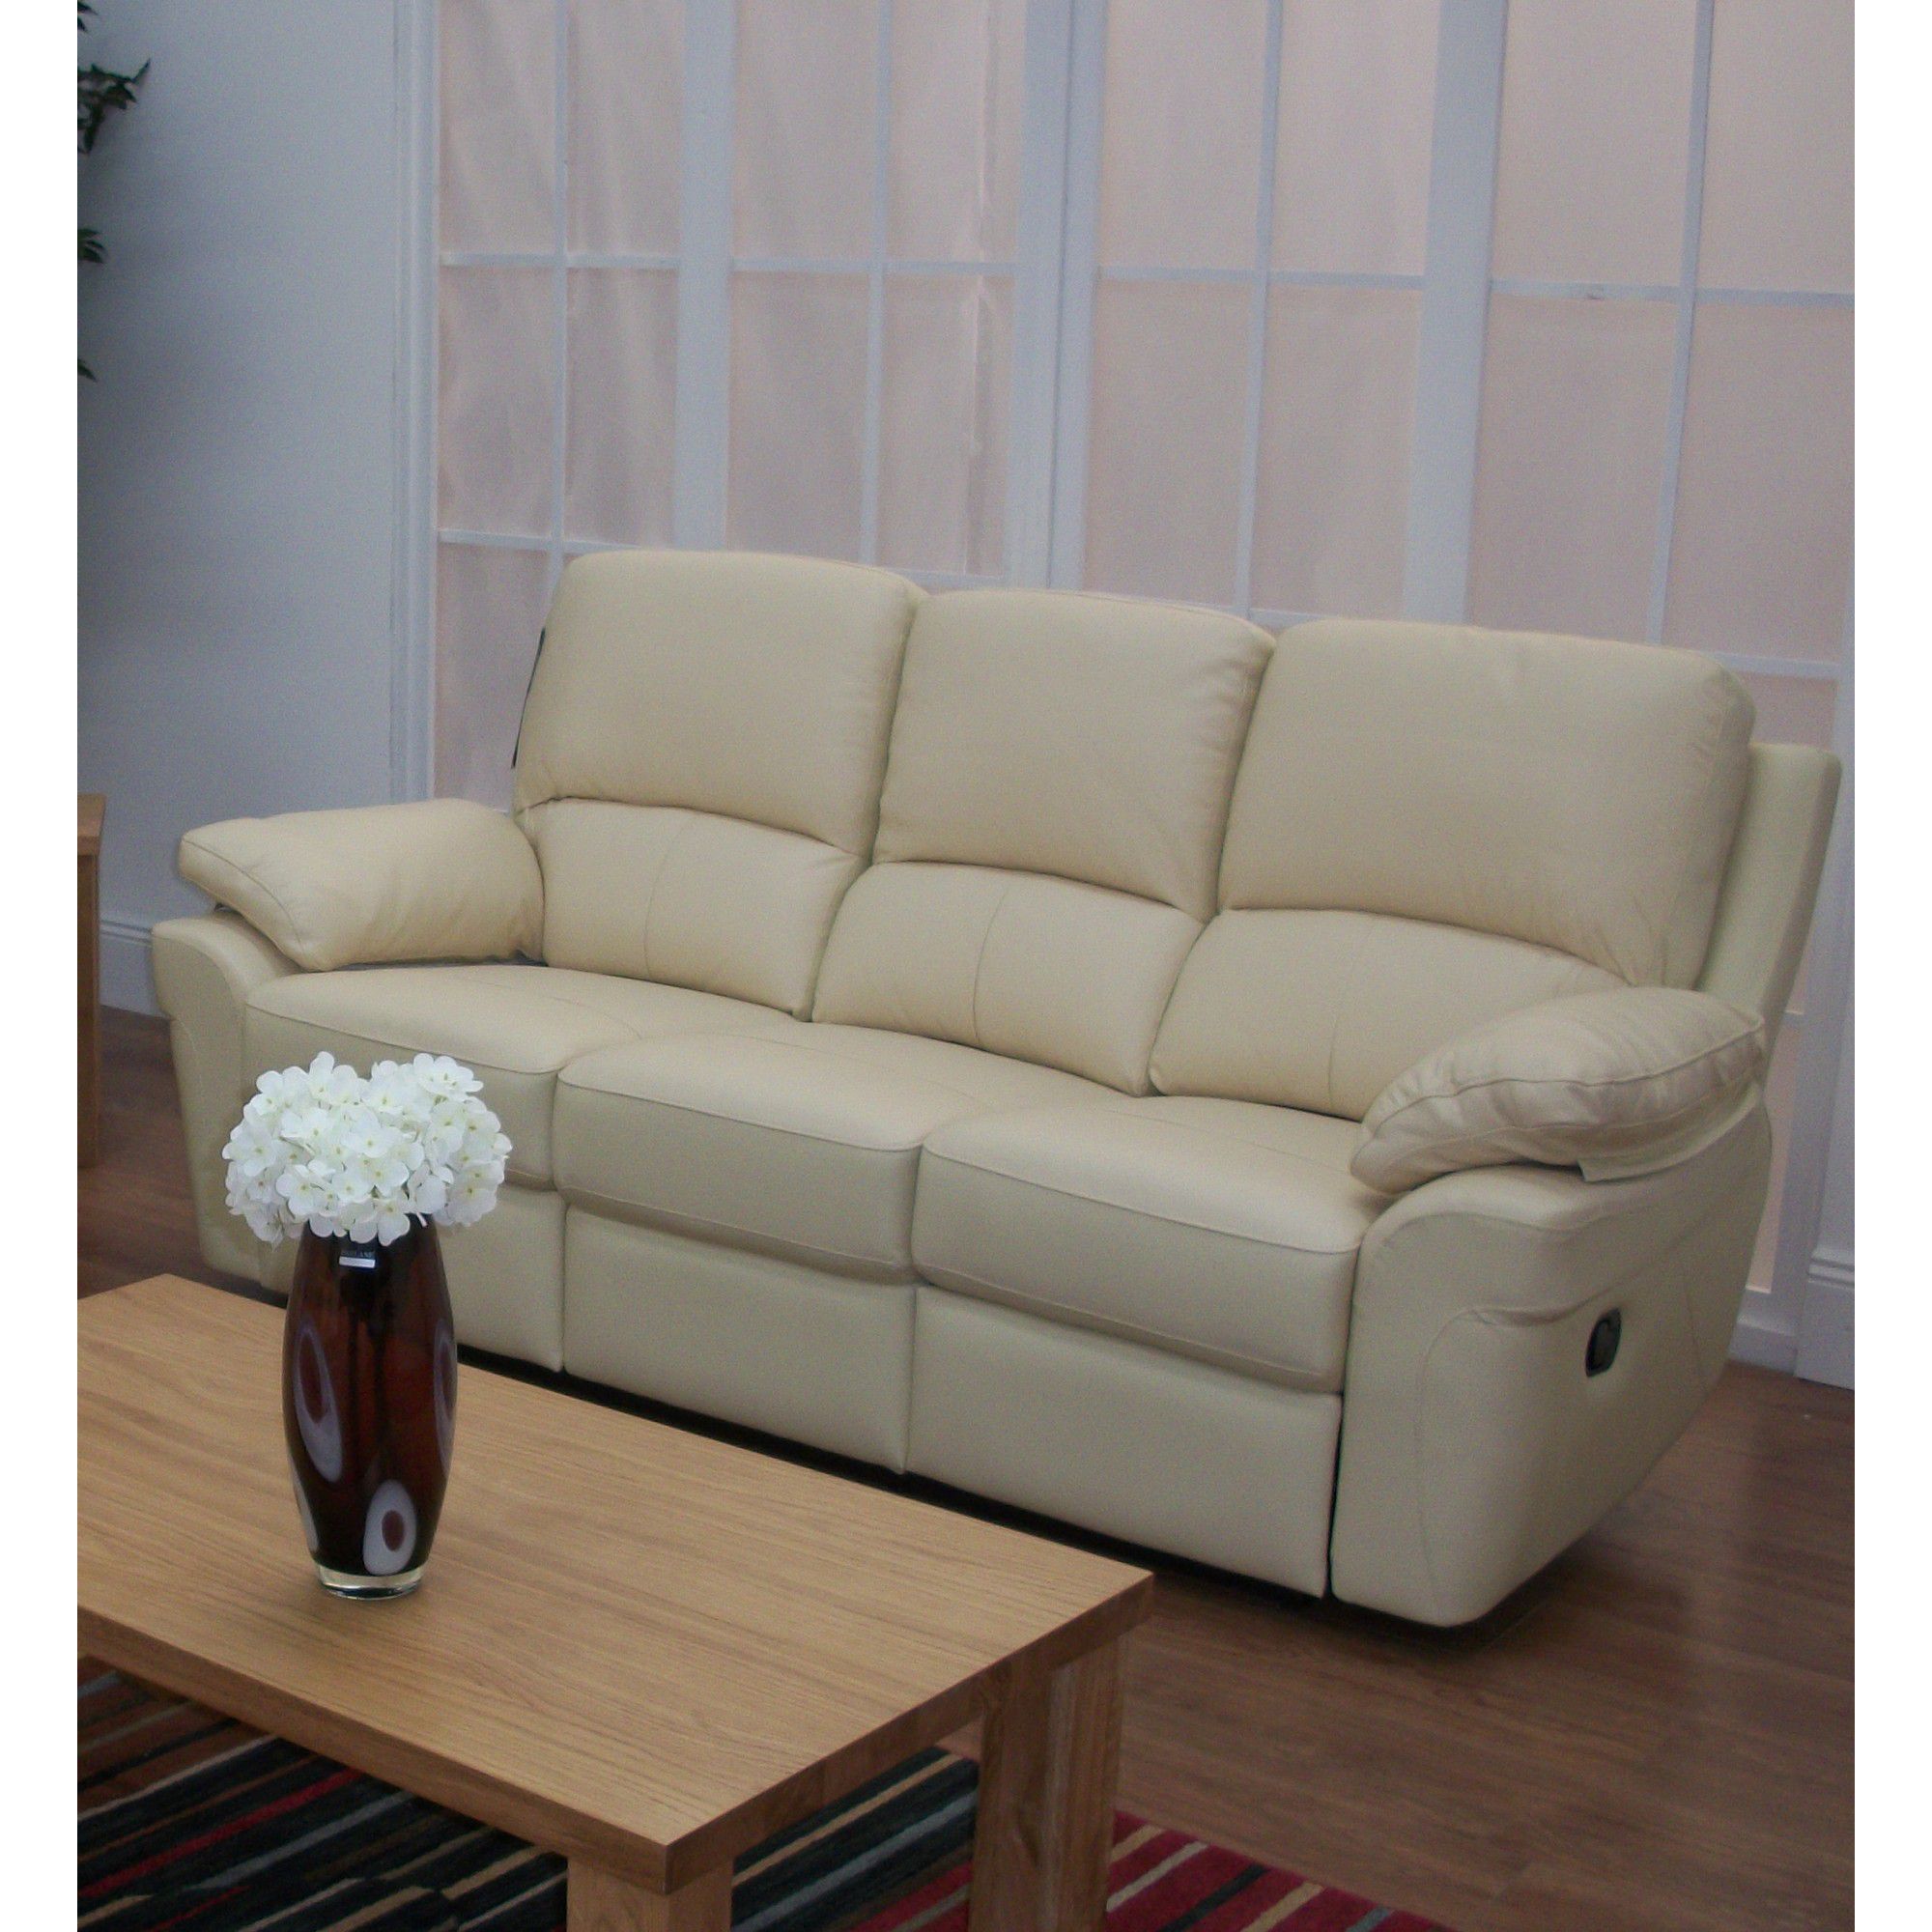 Furniture Link Monzano Three Fixed Seat Sofa in Ivory - Ivory at Tesco Direct